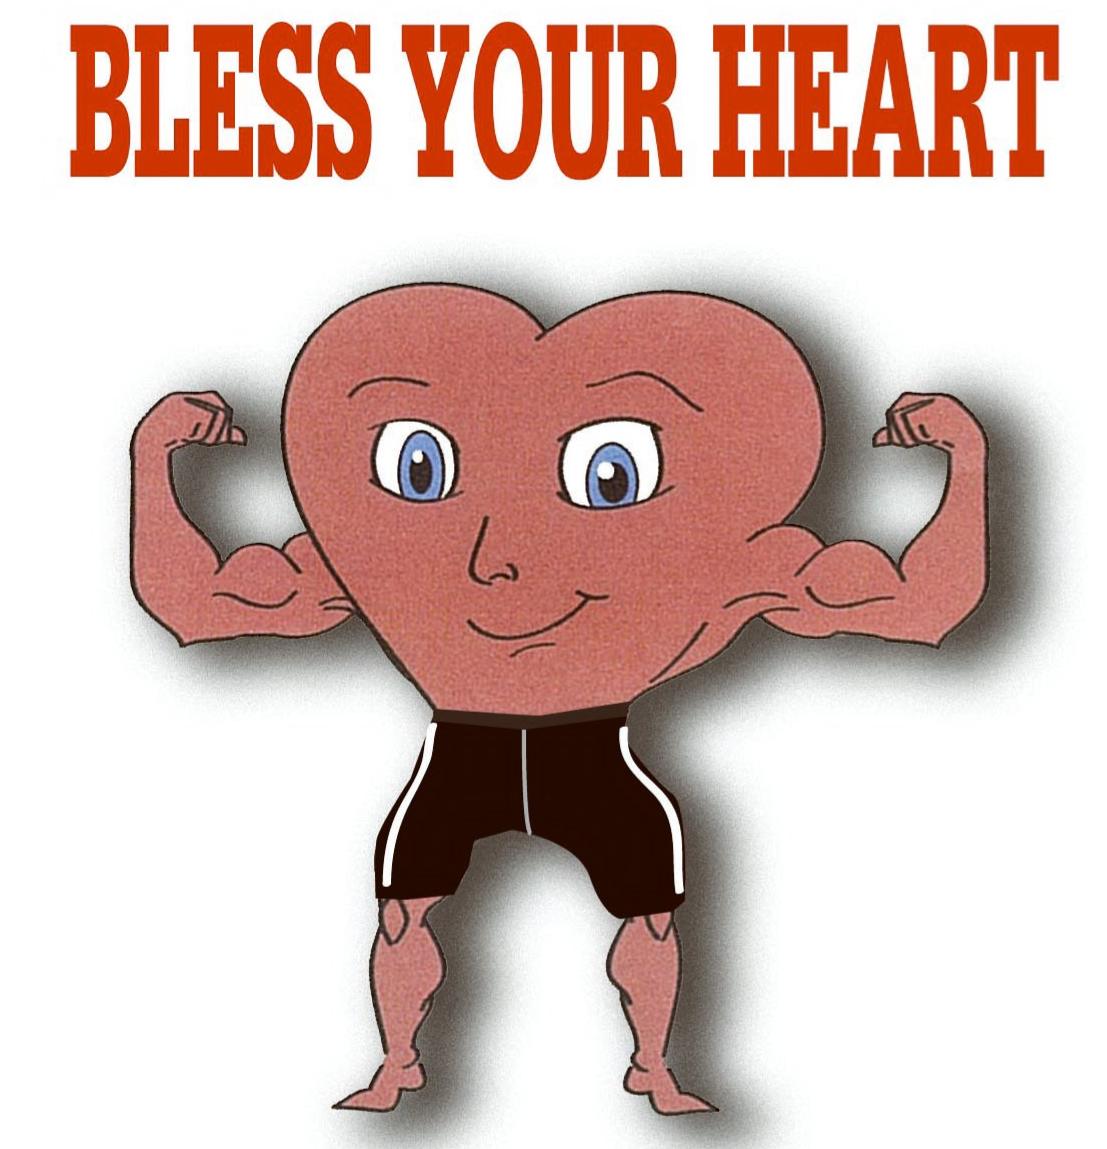 BLESS YOUR HEART